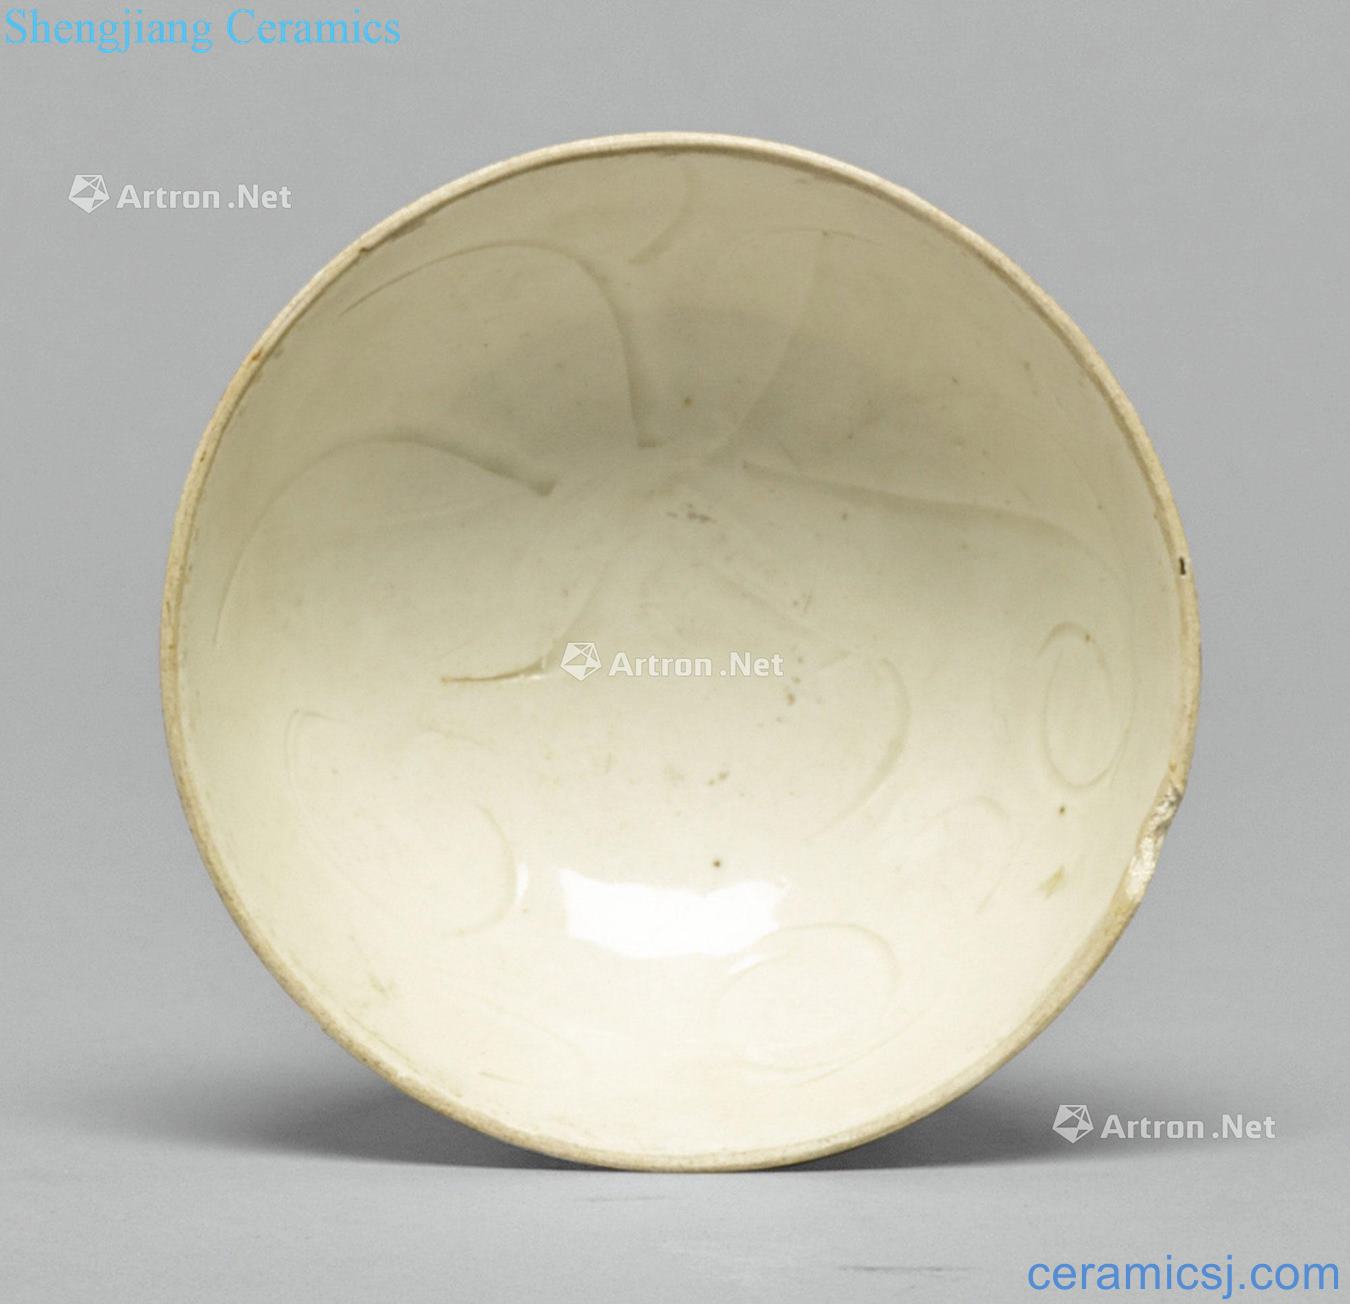 The song kiln carved lotus pattern 盌